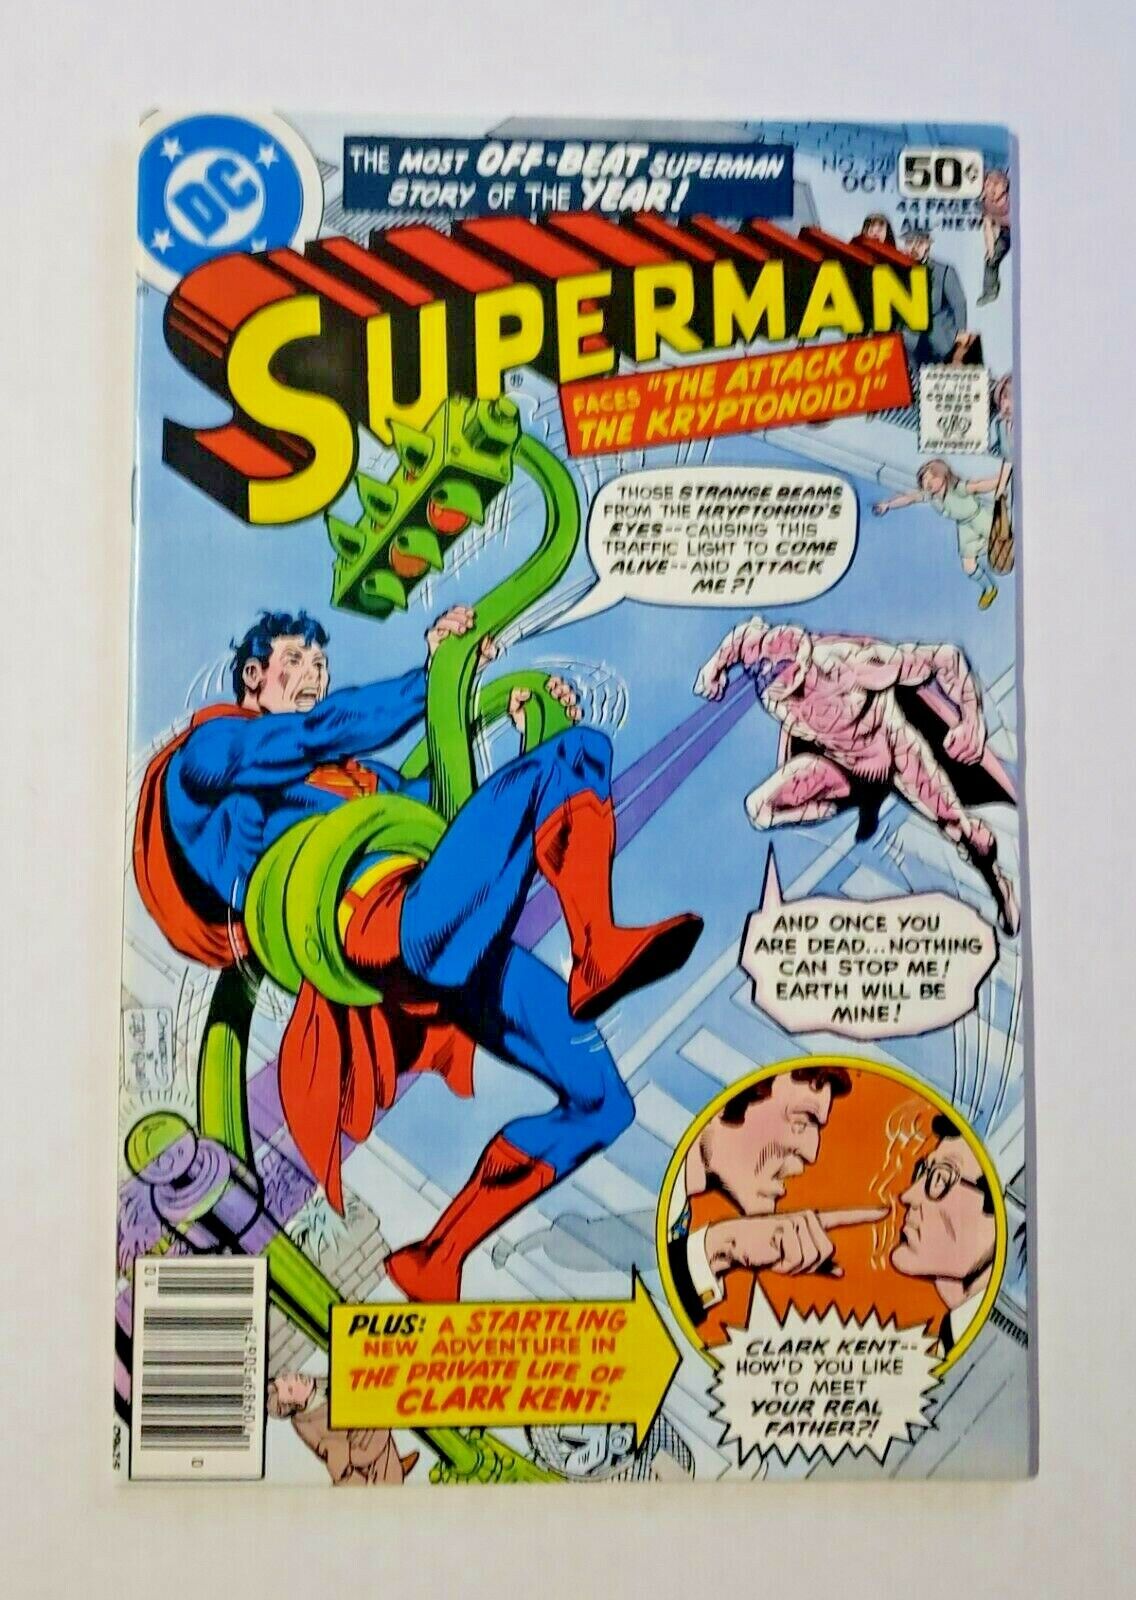 DC COMICS SUPERMAN #328 OCT 1978 NM+ WH PAGES ATTACK OF THE KRYTONOID BRONZE AGE